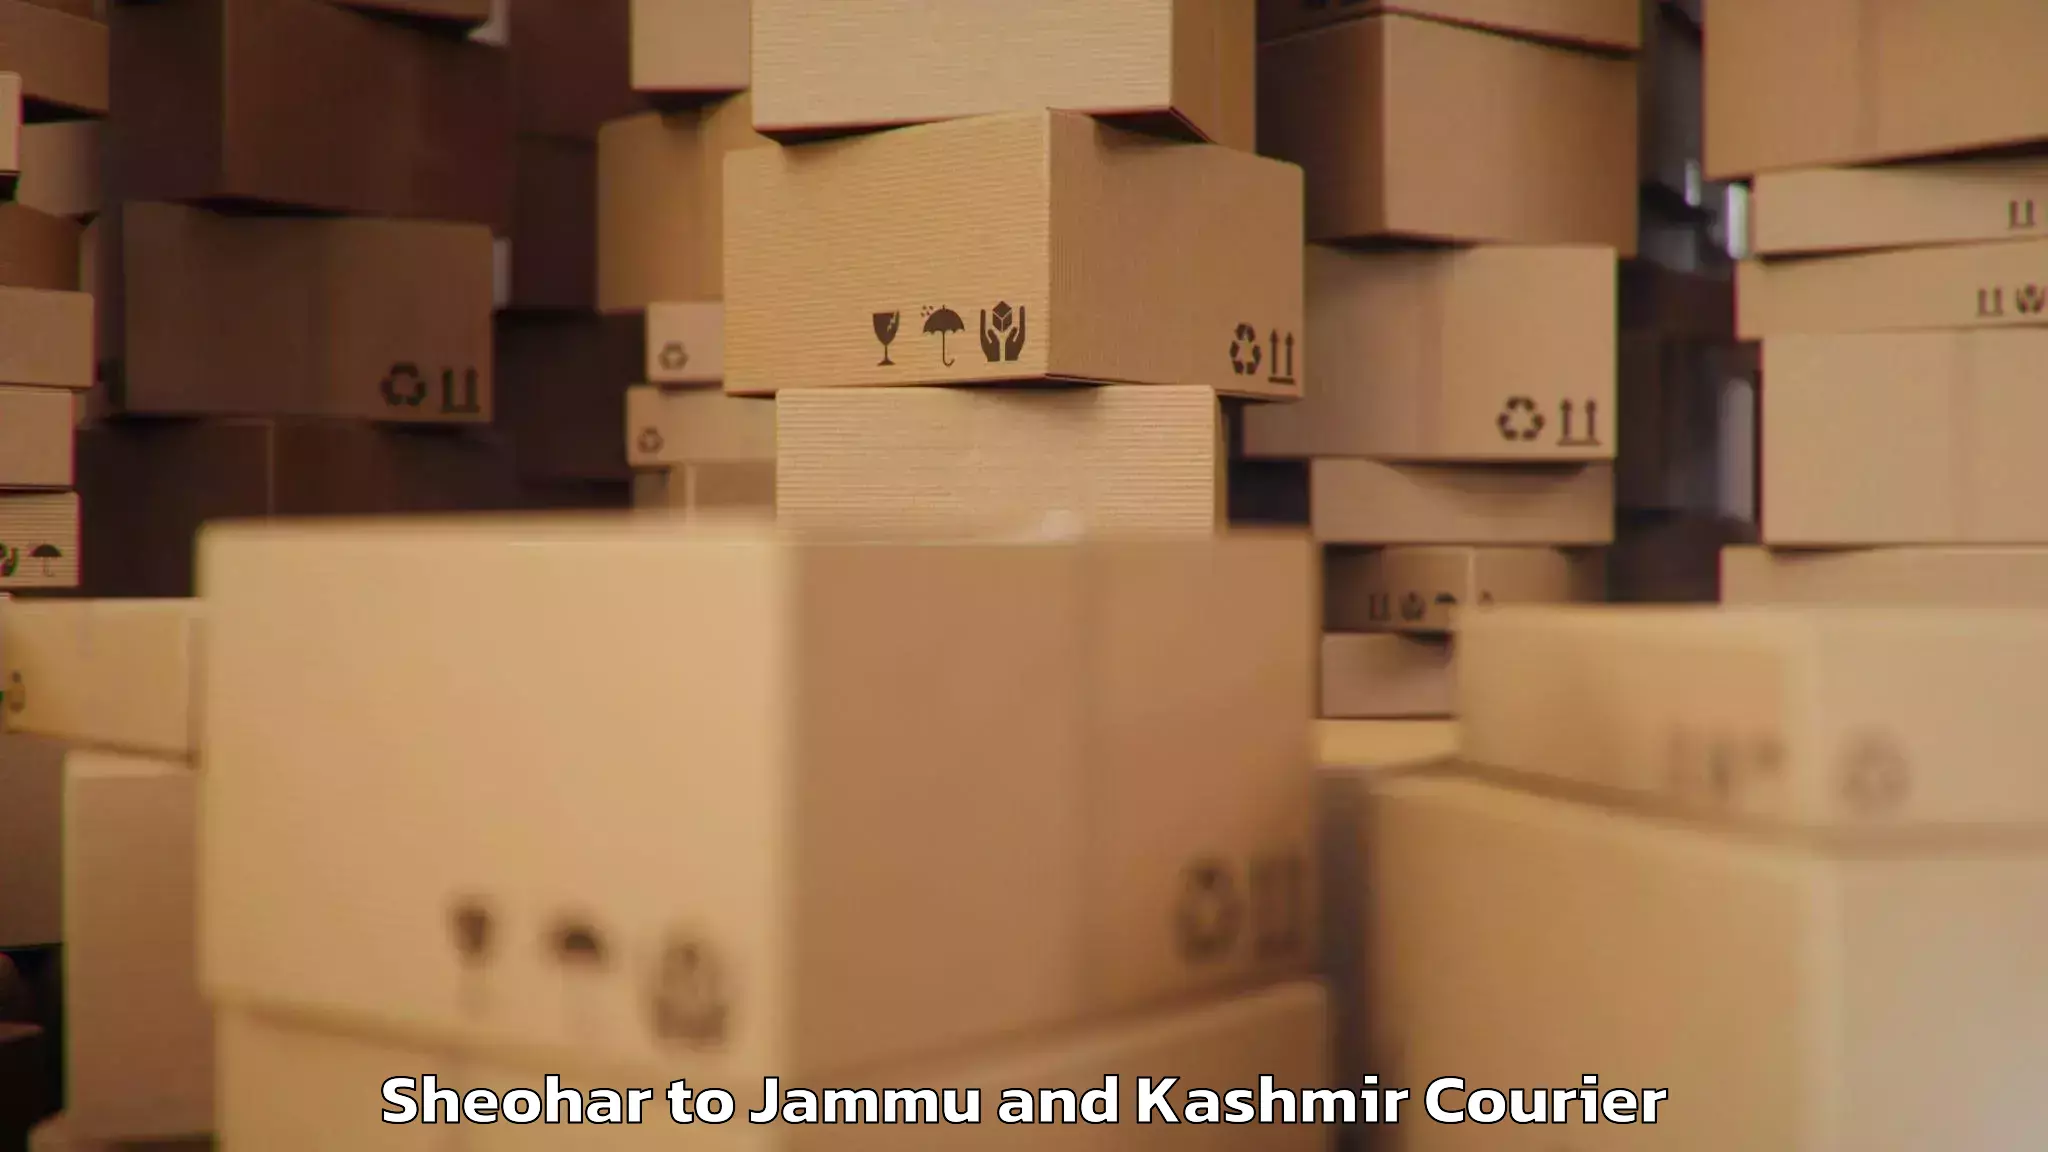 Personal effects shipping in Sheohar to Jammu and Kashmir